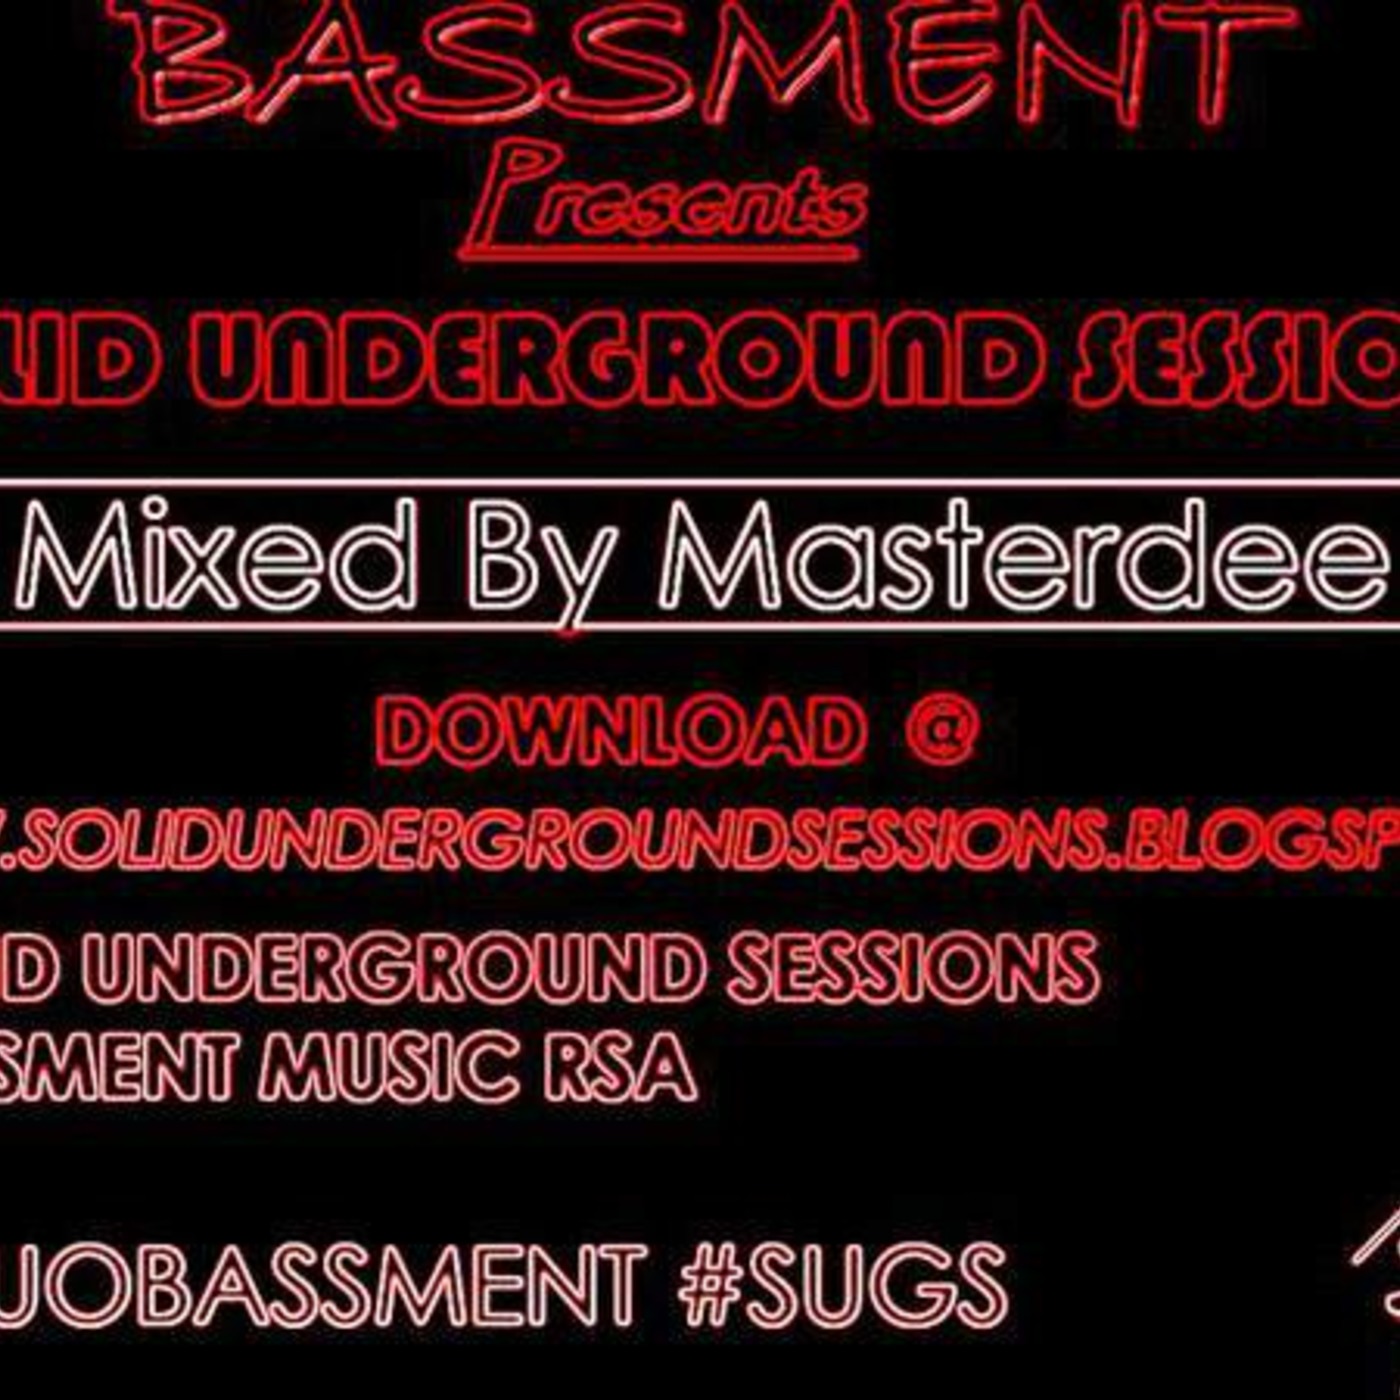 #12 Mixed By Masterdee #SUGS